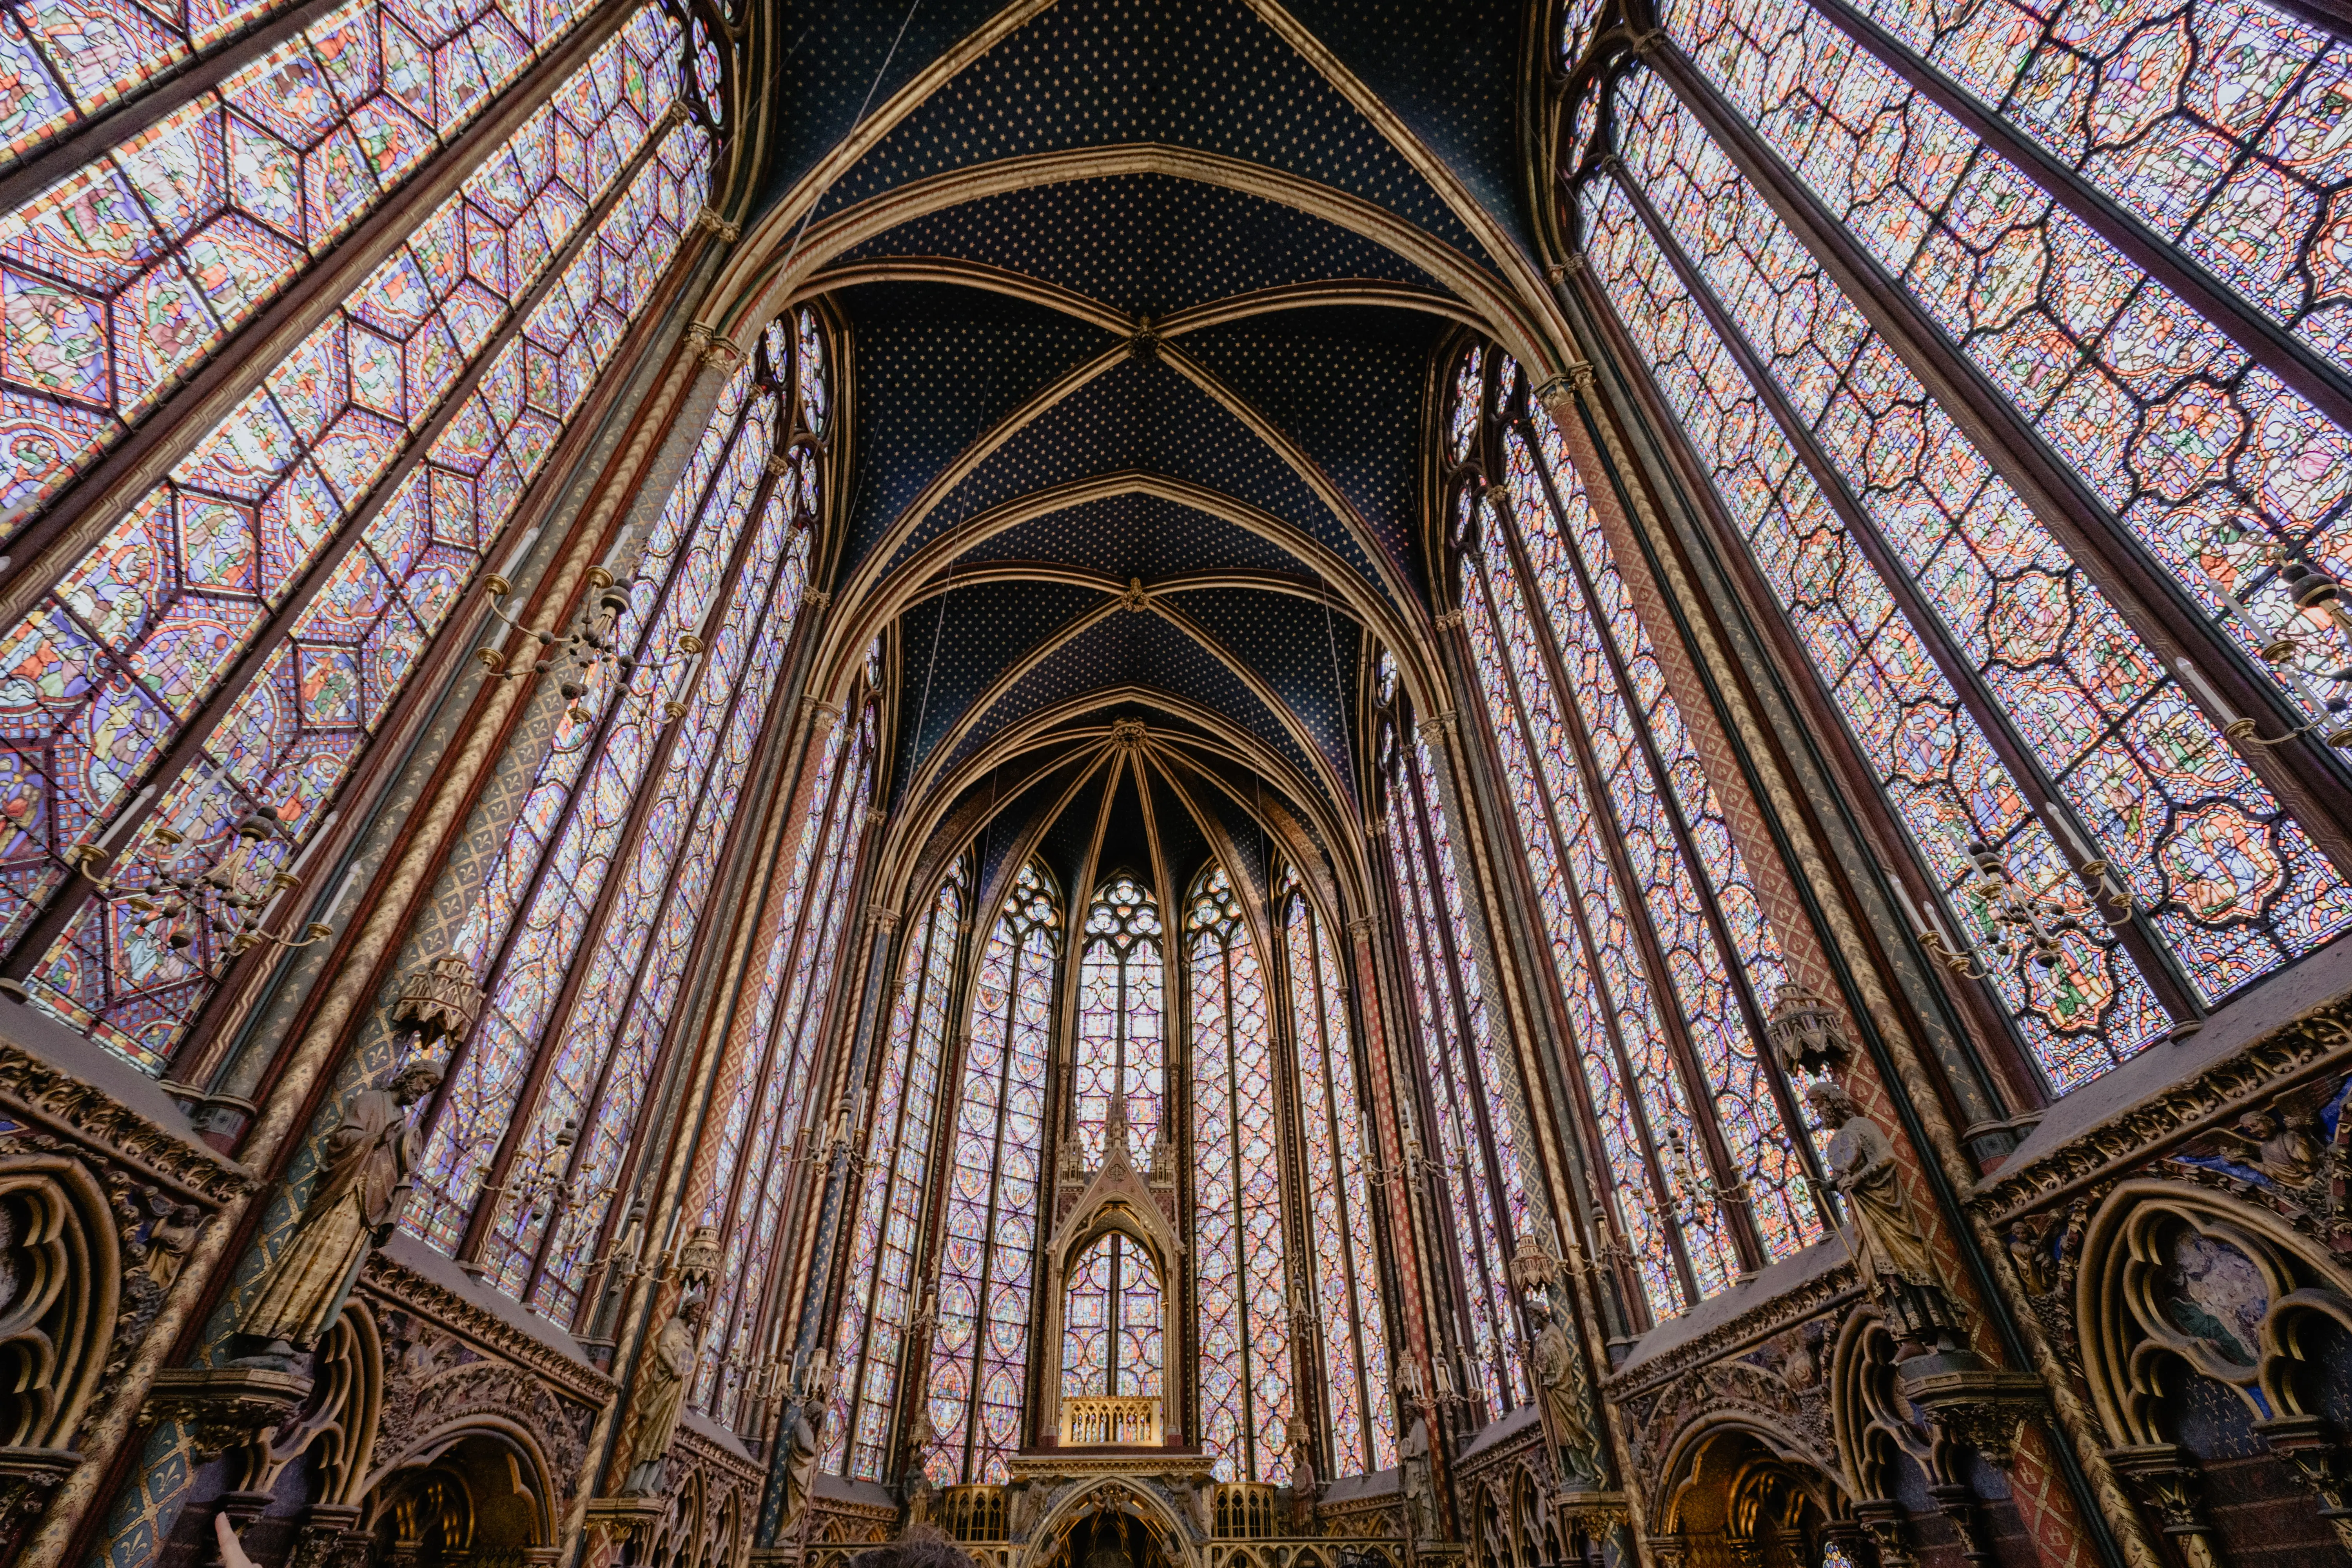 Itinerary of 14 days in France: Sainte Chapelle